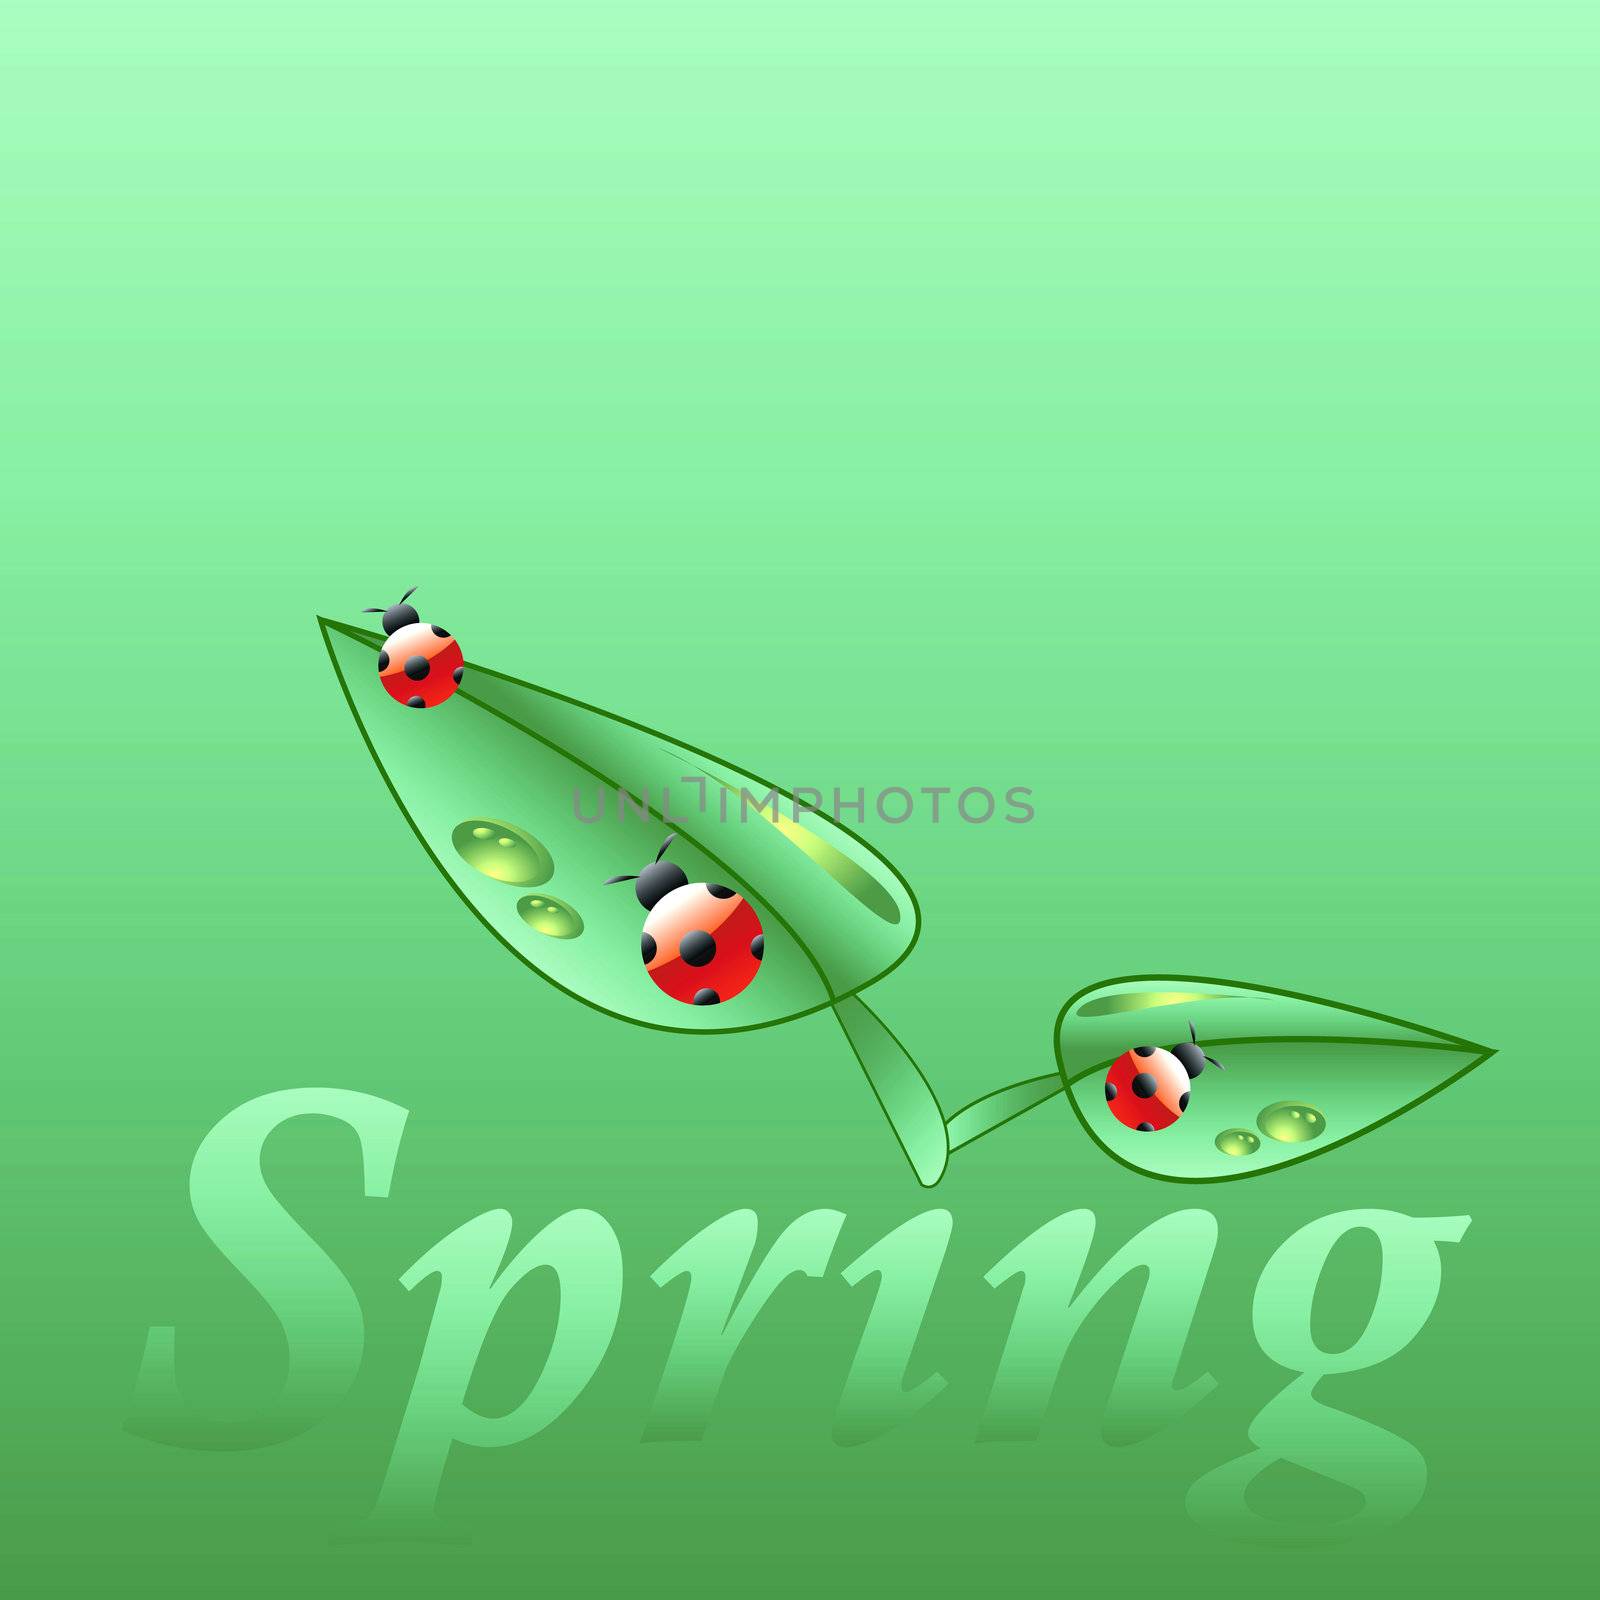 leaves, dewdrops and ladybugs on the word spring, plenty of copy space